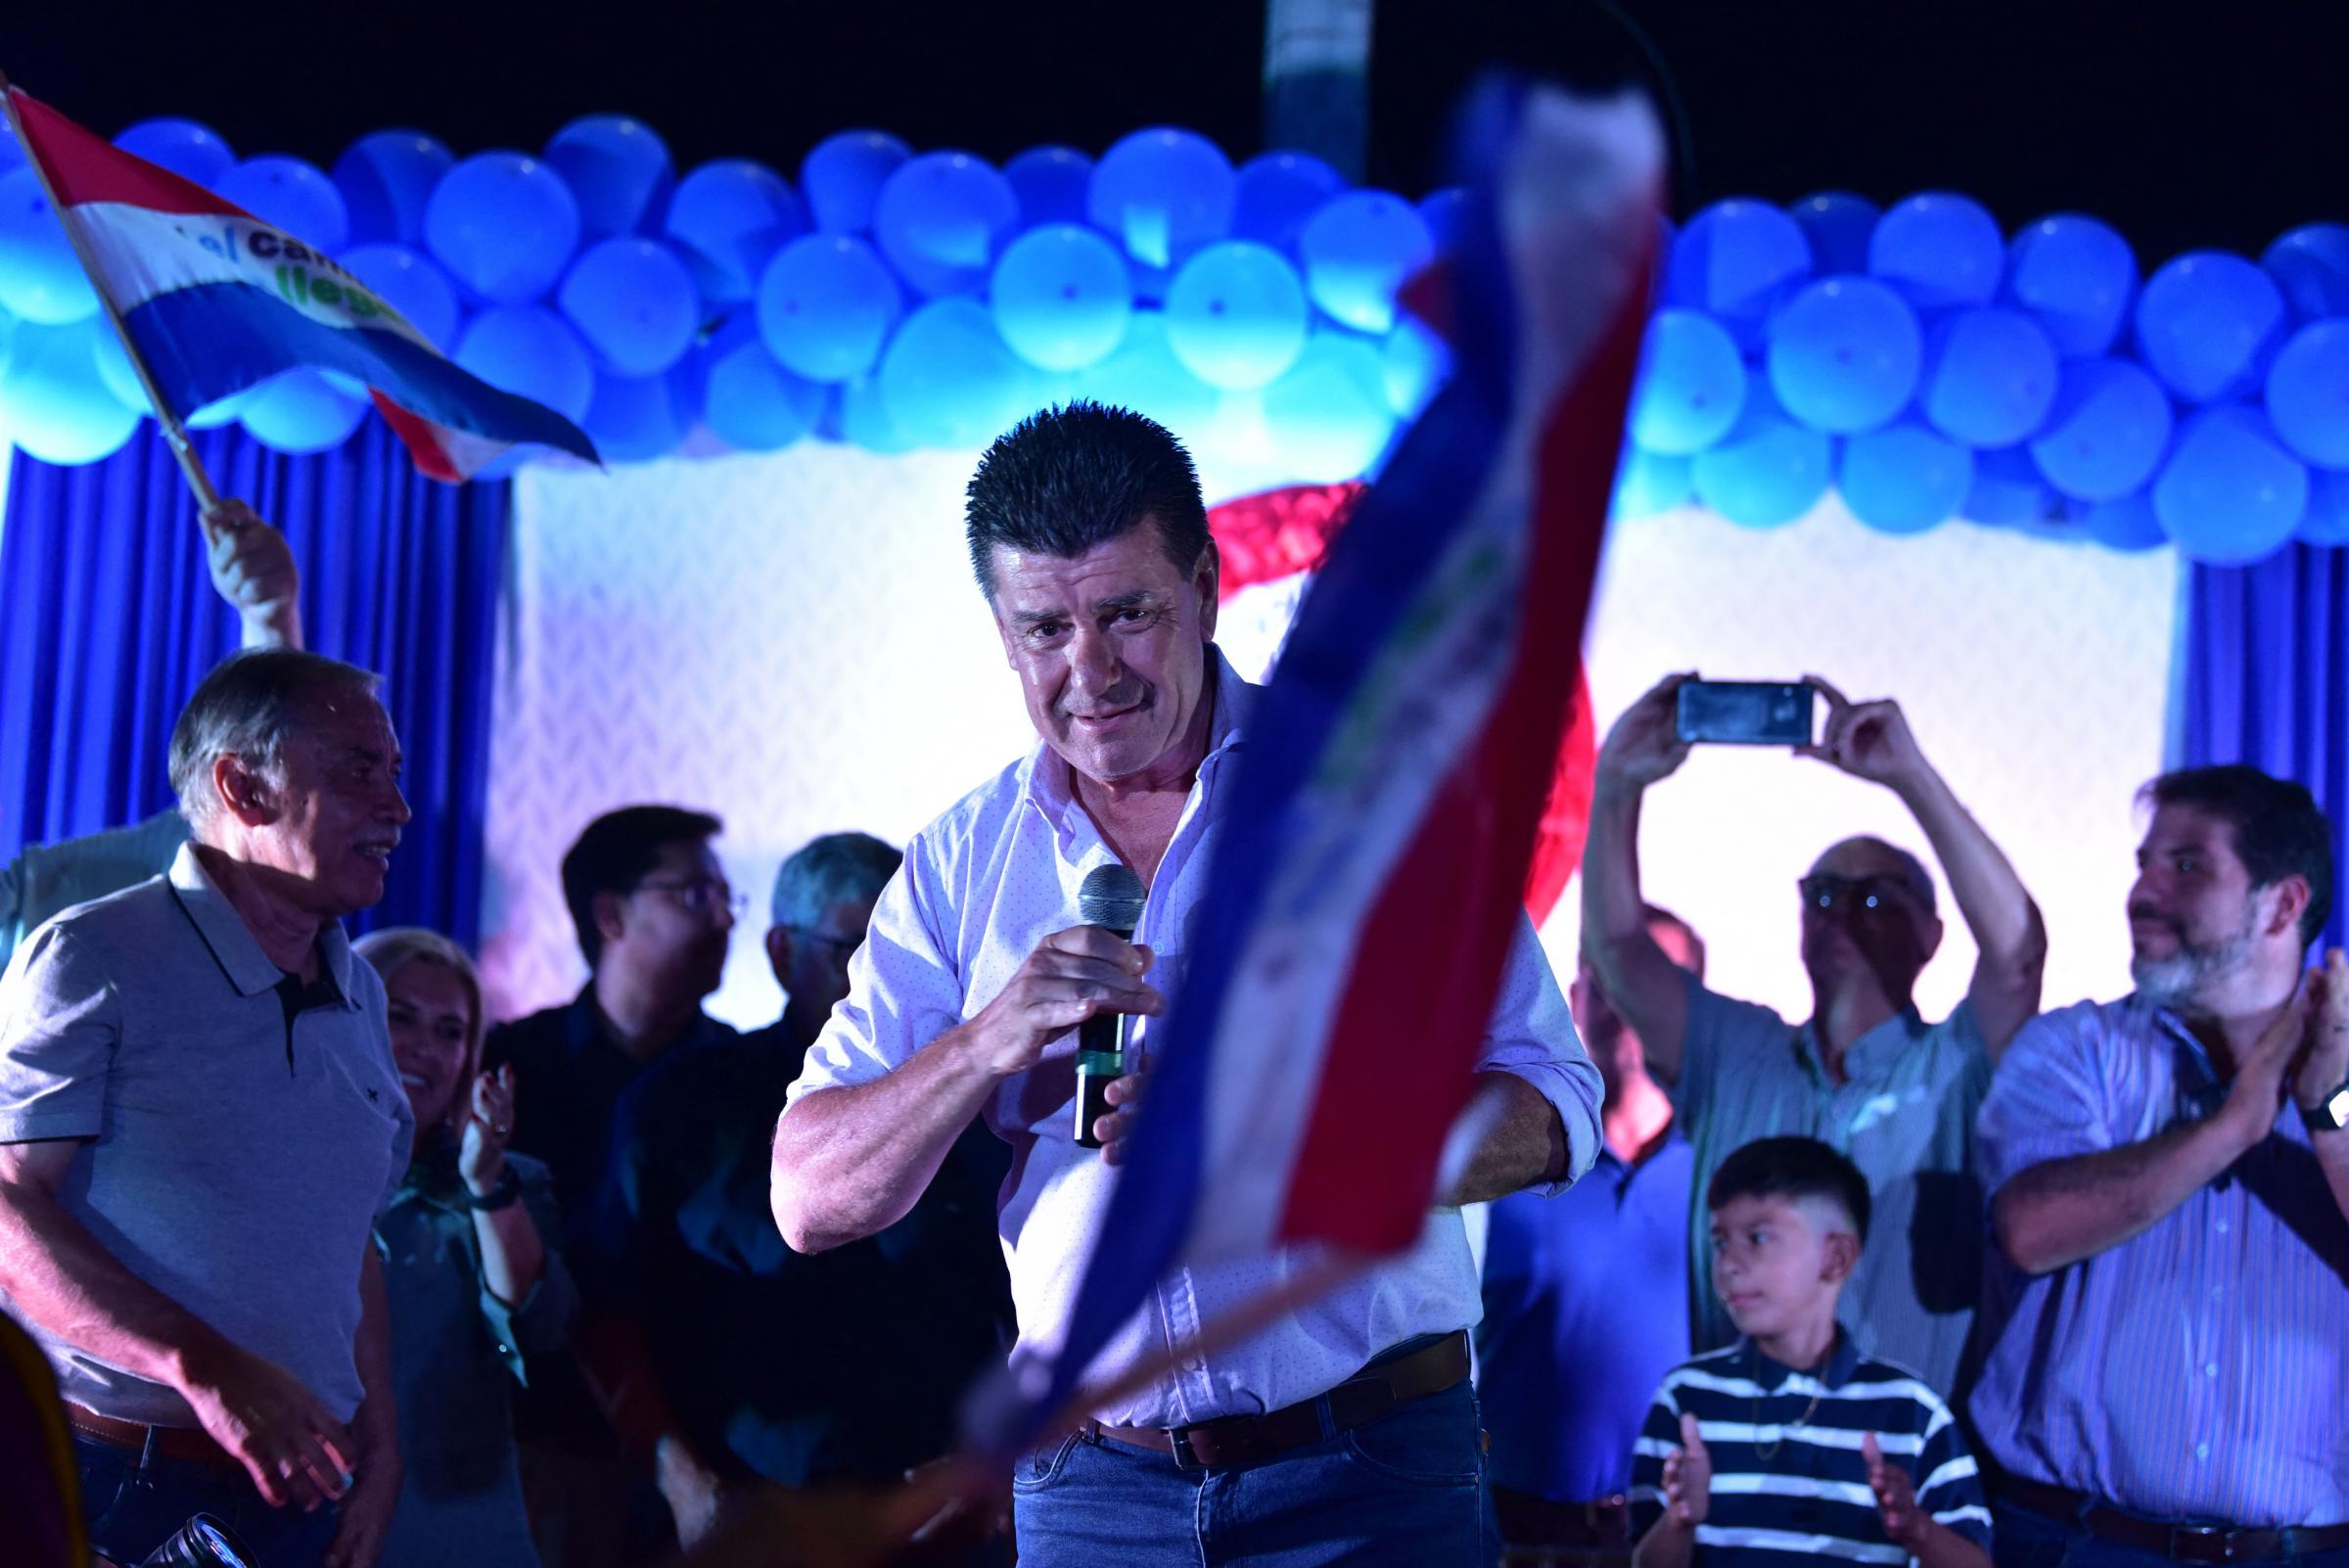 Paraguayan presidential candidate Efrain Alegre at a rally in Luque earlier this monthPicture: Norberto Duarte/AFP via Getty Images